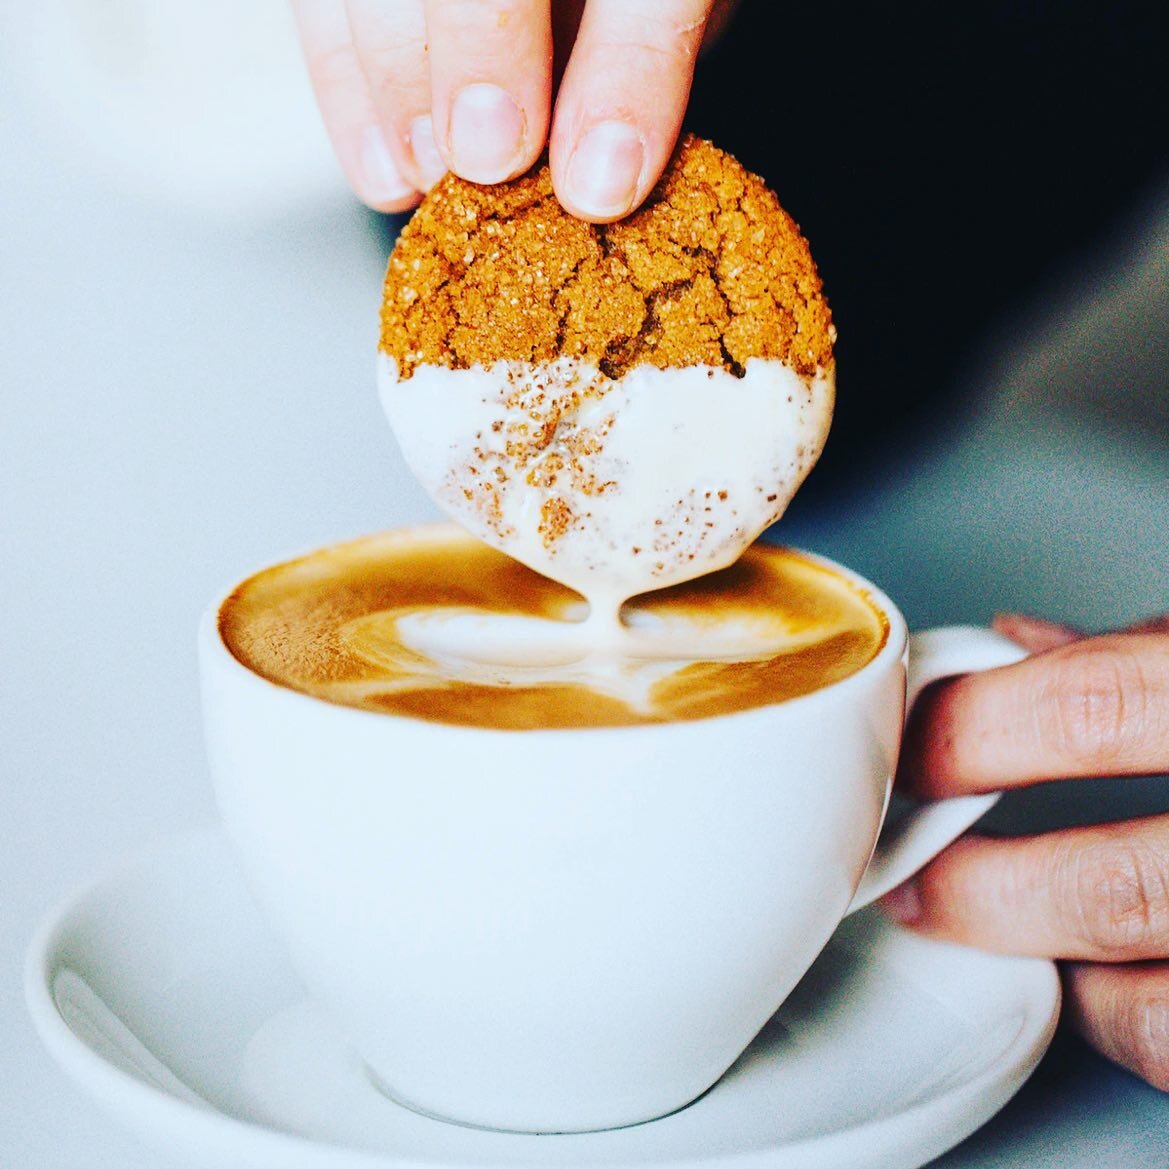 Good news! Our Pumpkin Spice drinks are back. We apologize for that brief interruption.🥴

You are now free to drink, sip, dip, gulp, funnel, etc. 

Also! Church Street Ginger Bites will be back soon. Those are the perfect cookies for dipping. In the